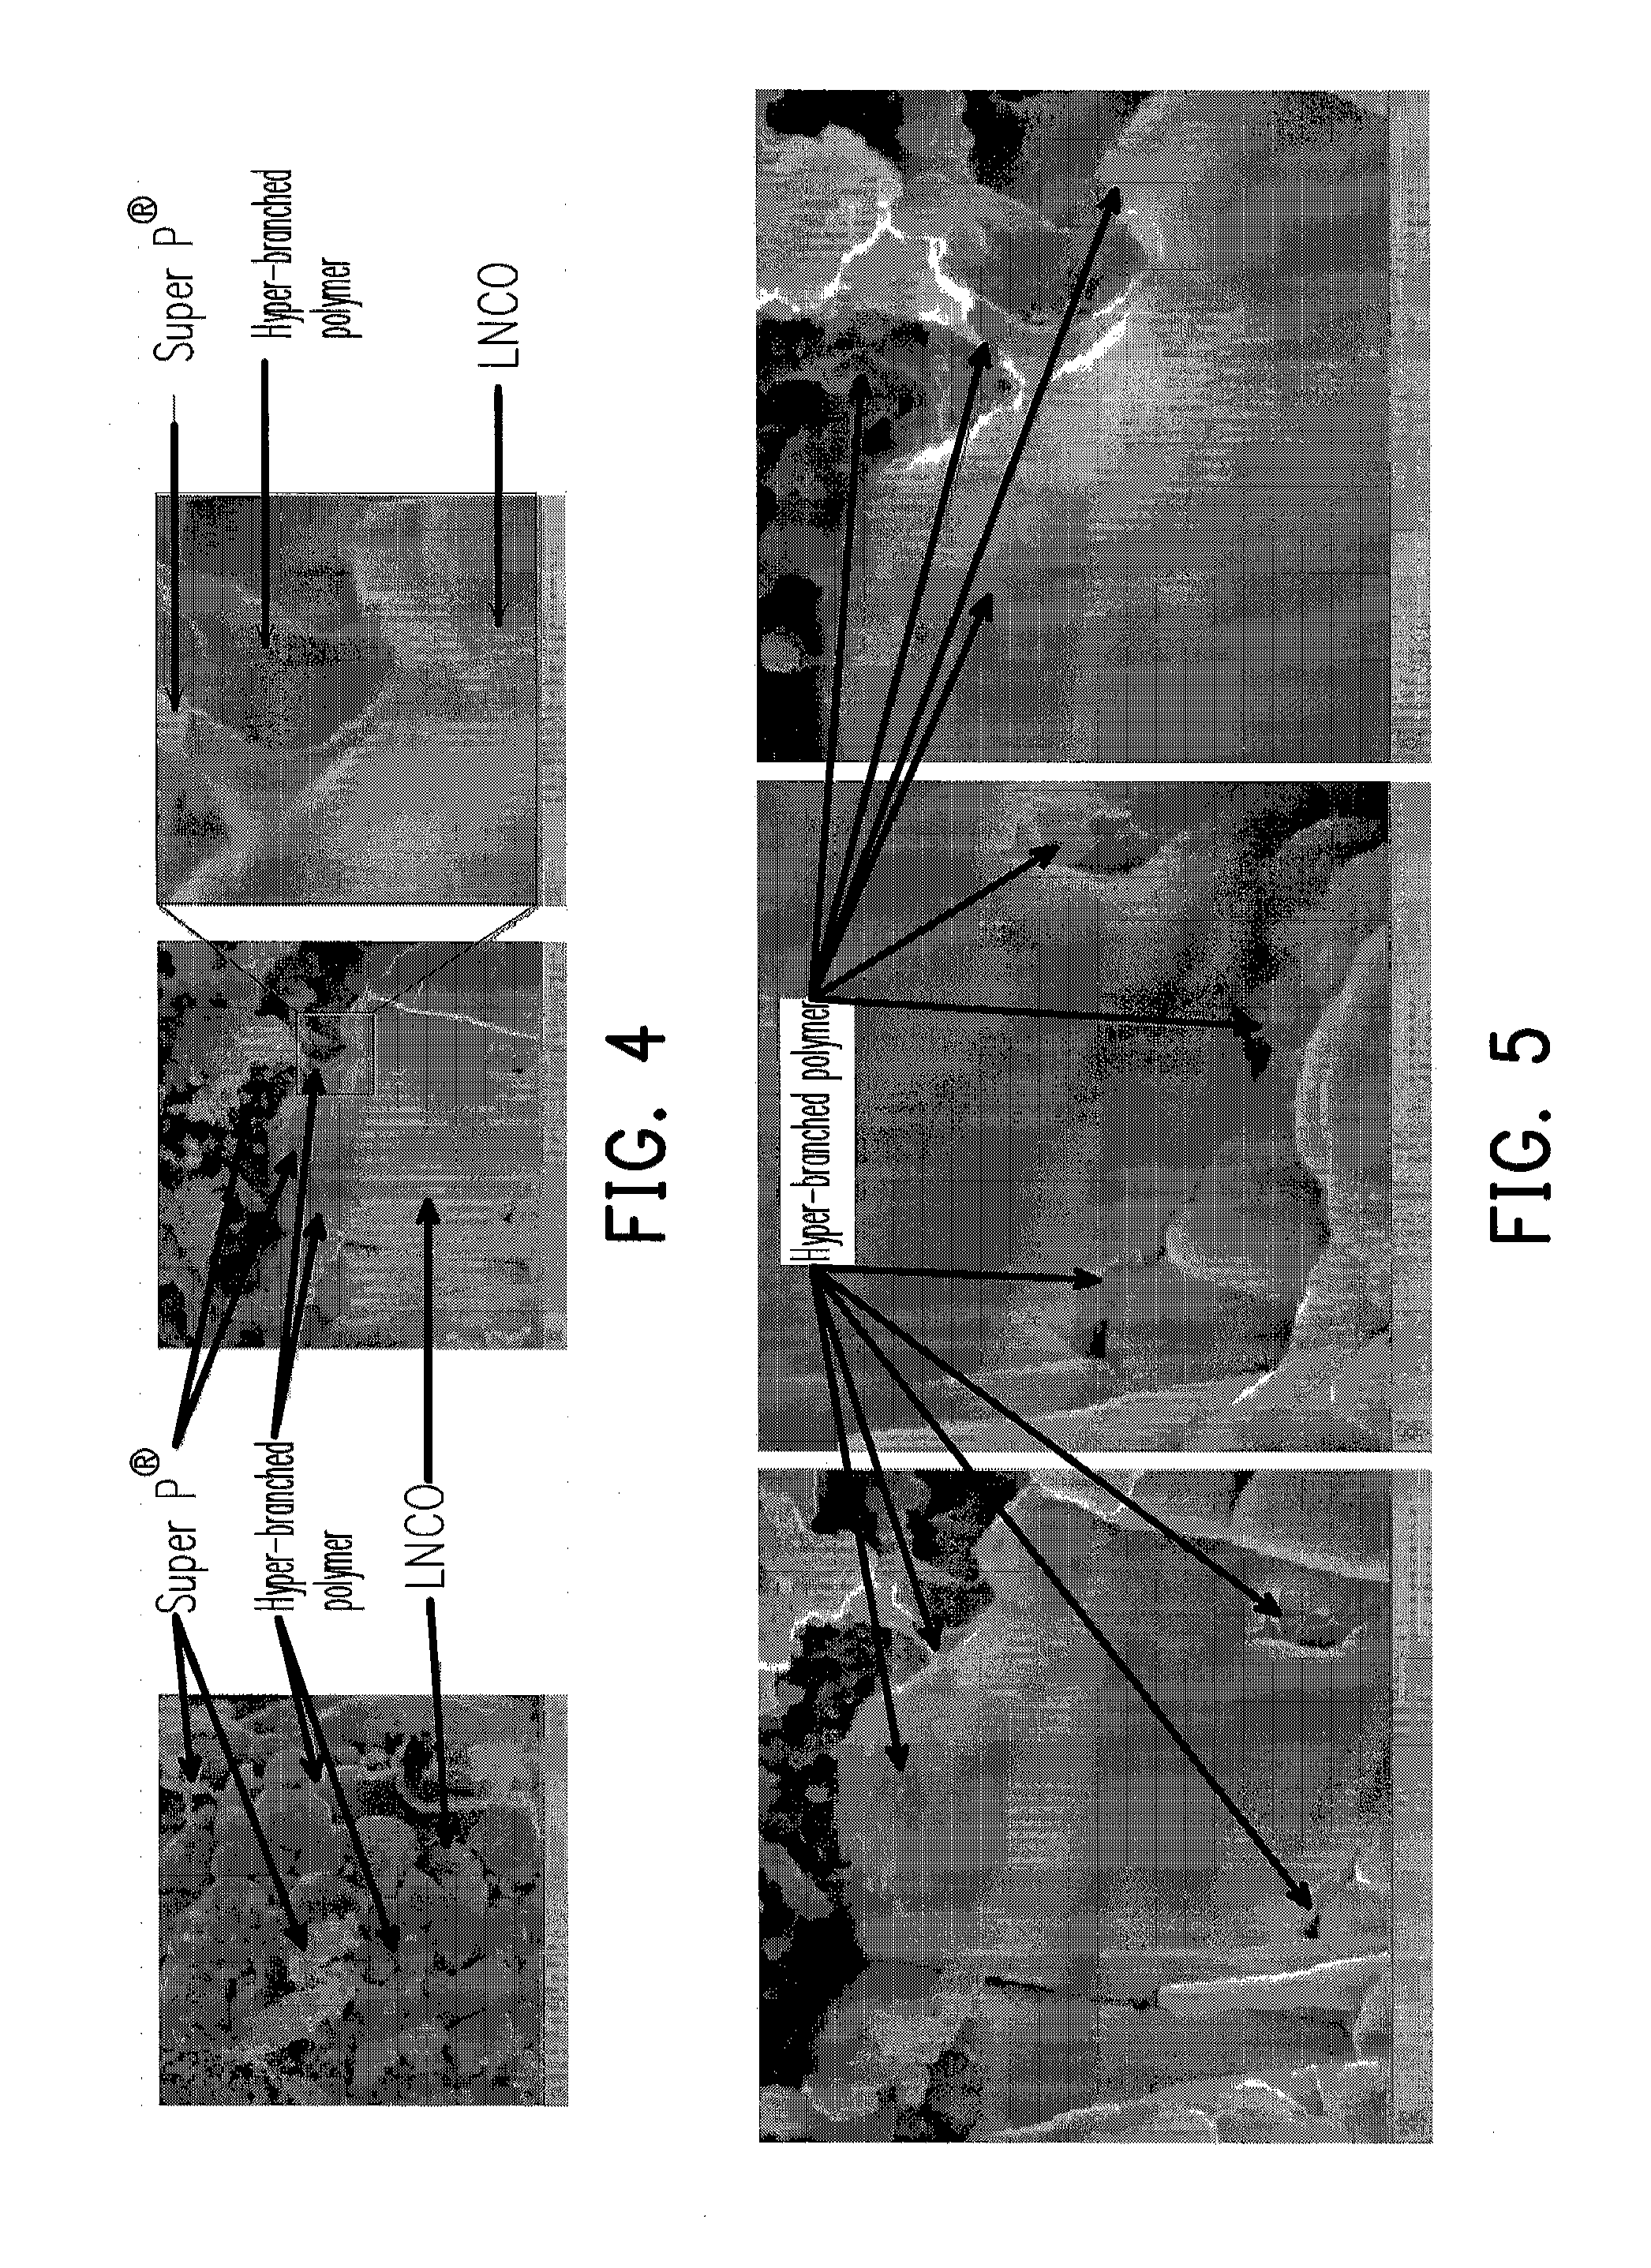 Cathode material structure and method for preparing the same